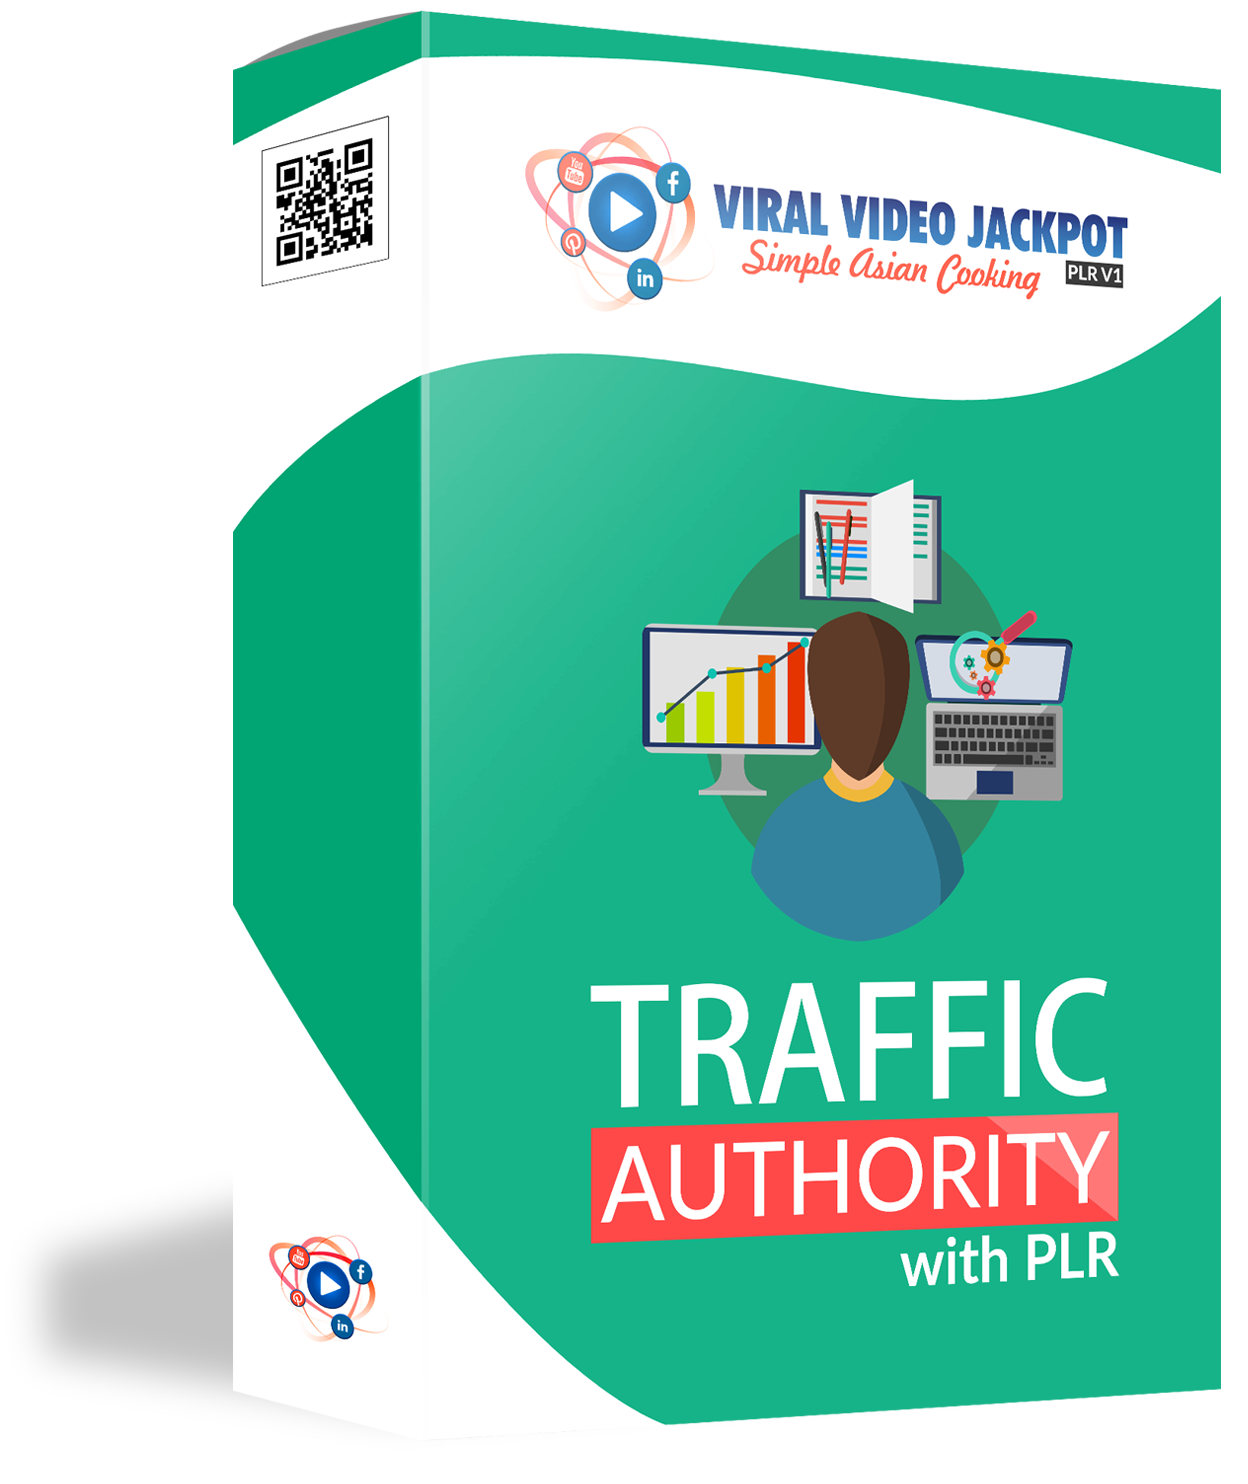 traffic authority with PLR